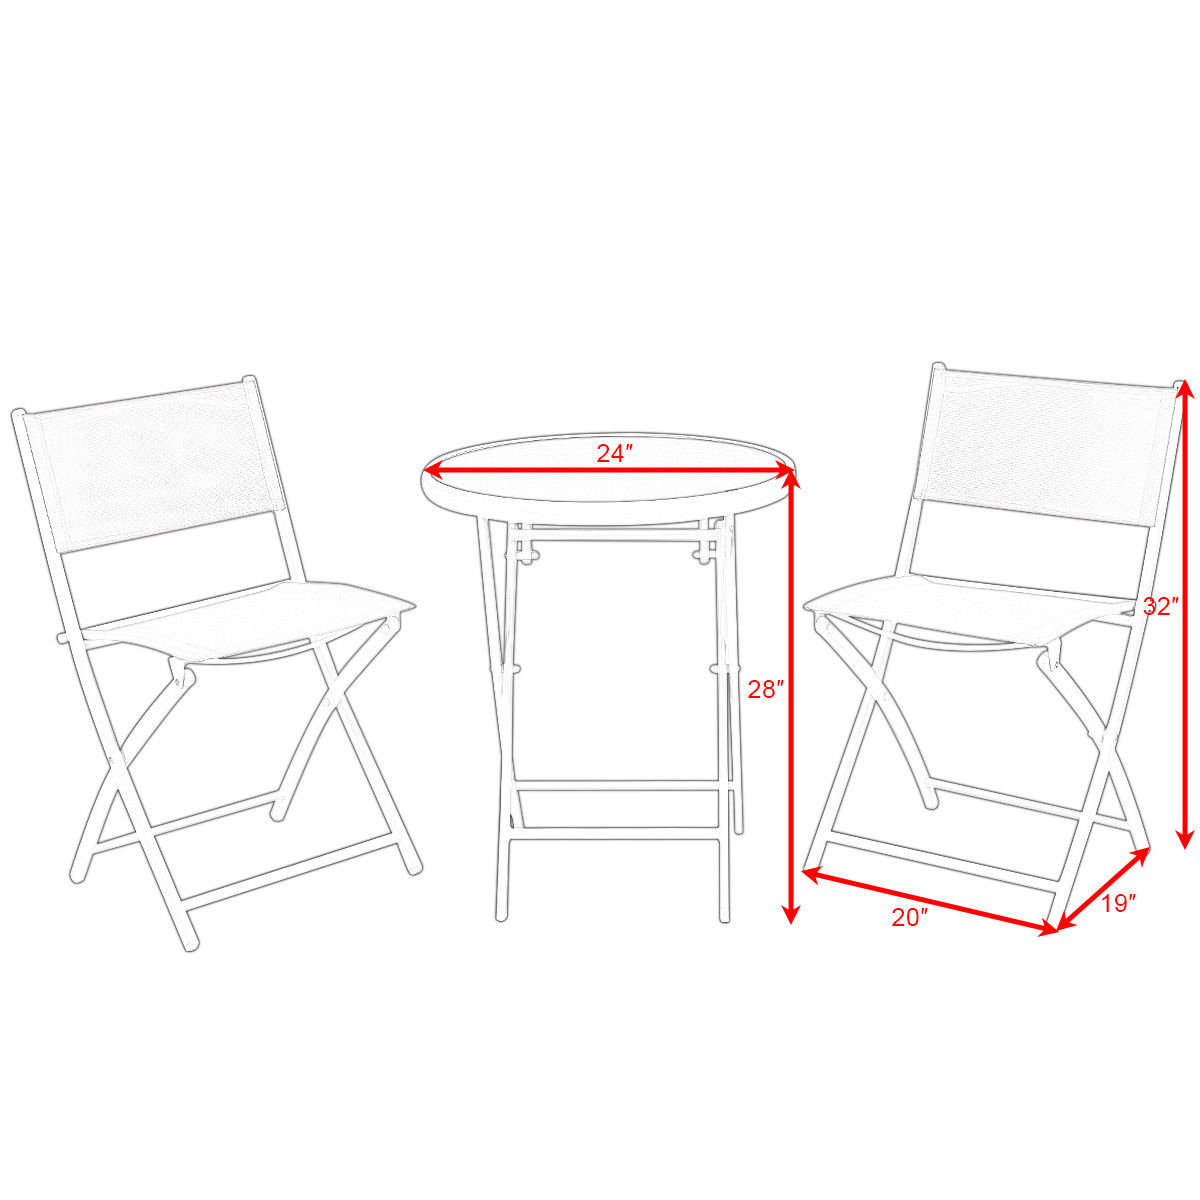 Costway 3 PCS Folding Bistro Table Chairs Set Garden Backyard Patio Furniture Red - image 3 of 7